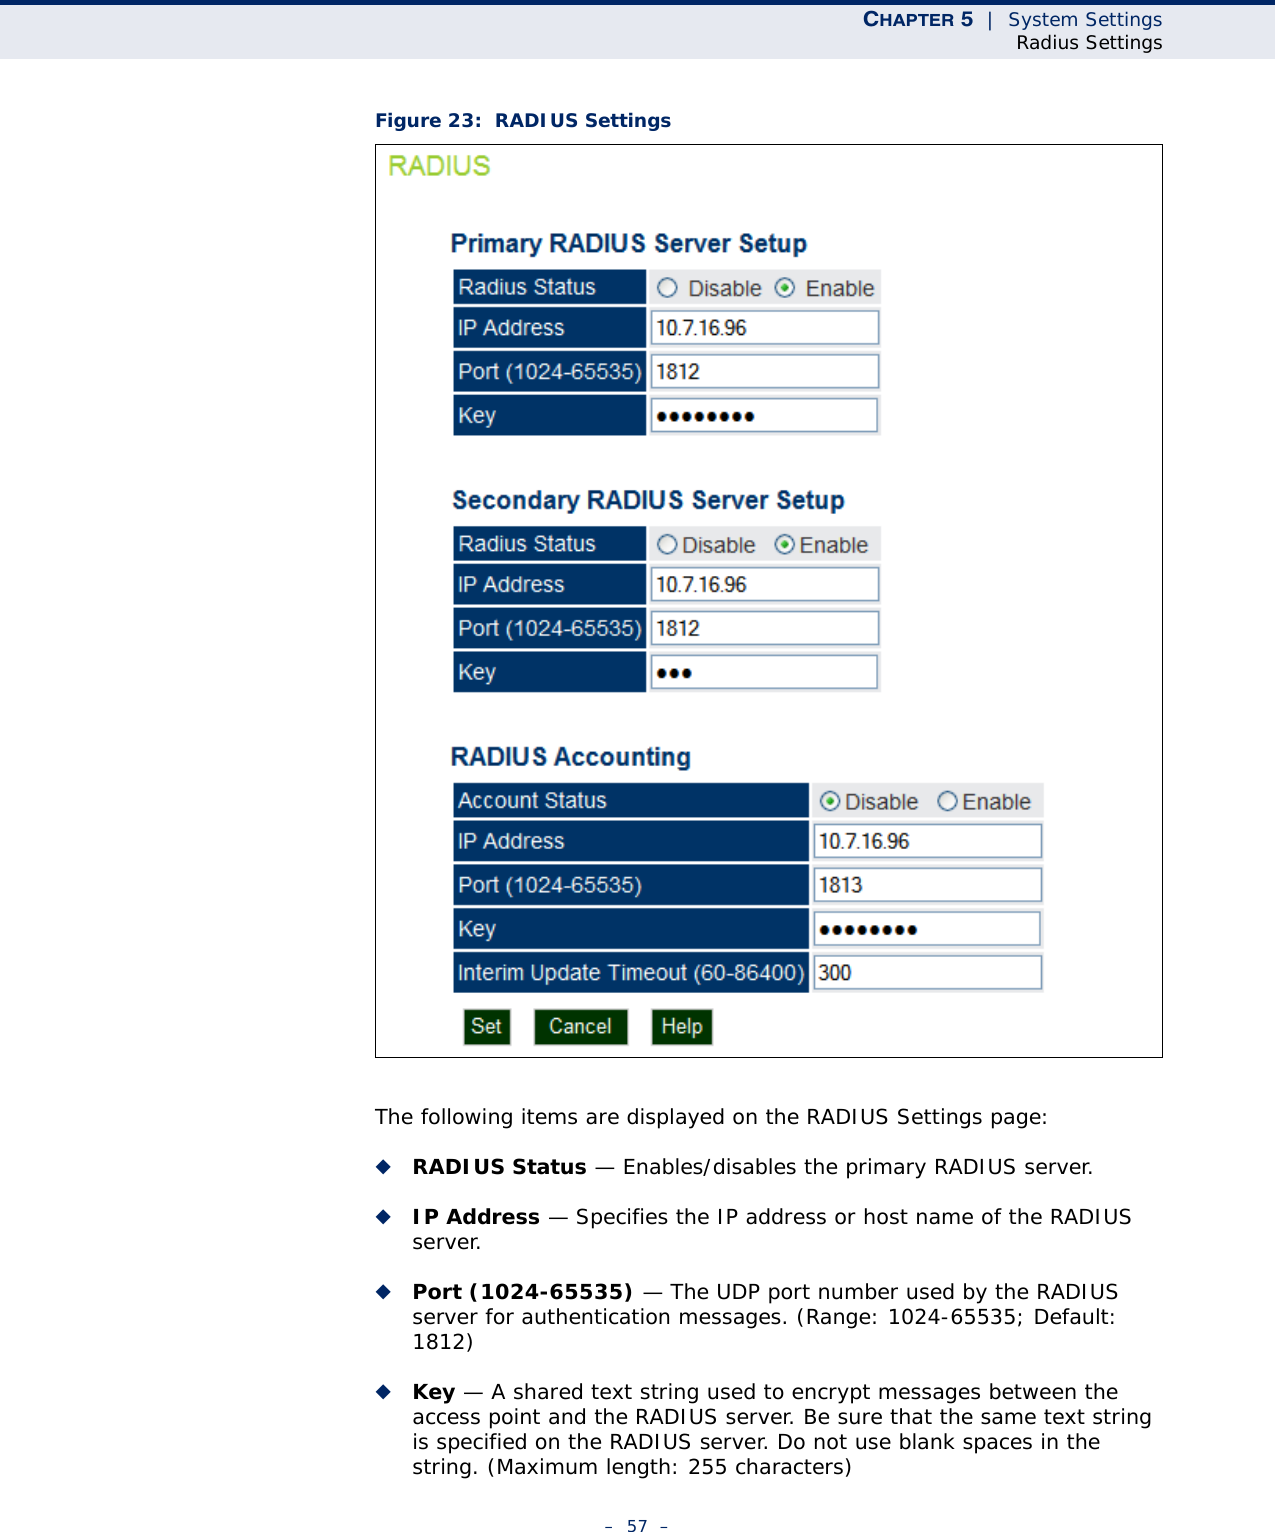 CHAPTER 5  |  System SettingsRadius Settings–  57  –Figure 23:  RADIUS SettingsThe following items are displayed on the RADIUS Settings page:◆RADIUS Status — Enables/disables the primary RADIUS server.◆IP Address — Specifies the IP address or host name of the RADIUS server.◆Port (1024-65535) — The UDP port number used by the RADIUS server for authentication messages. (Range: 1024-65535; Default: 1812)◆Key — A shared text string used to encrypt messages between the access point and the RADIUS server. Be sure that the same text string is specified on the RADIUS server. Do not use blank spaces in the string. (Maximum length: 255 characters)